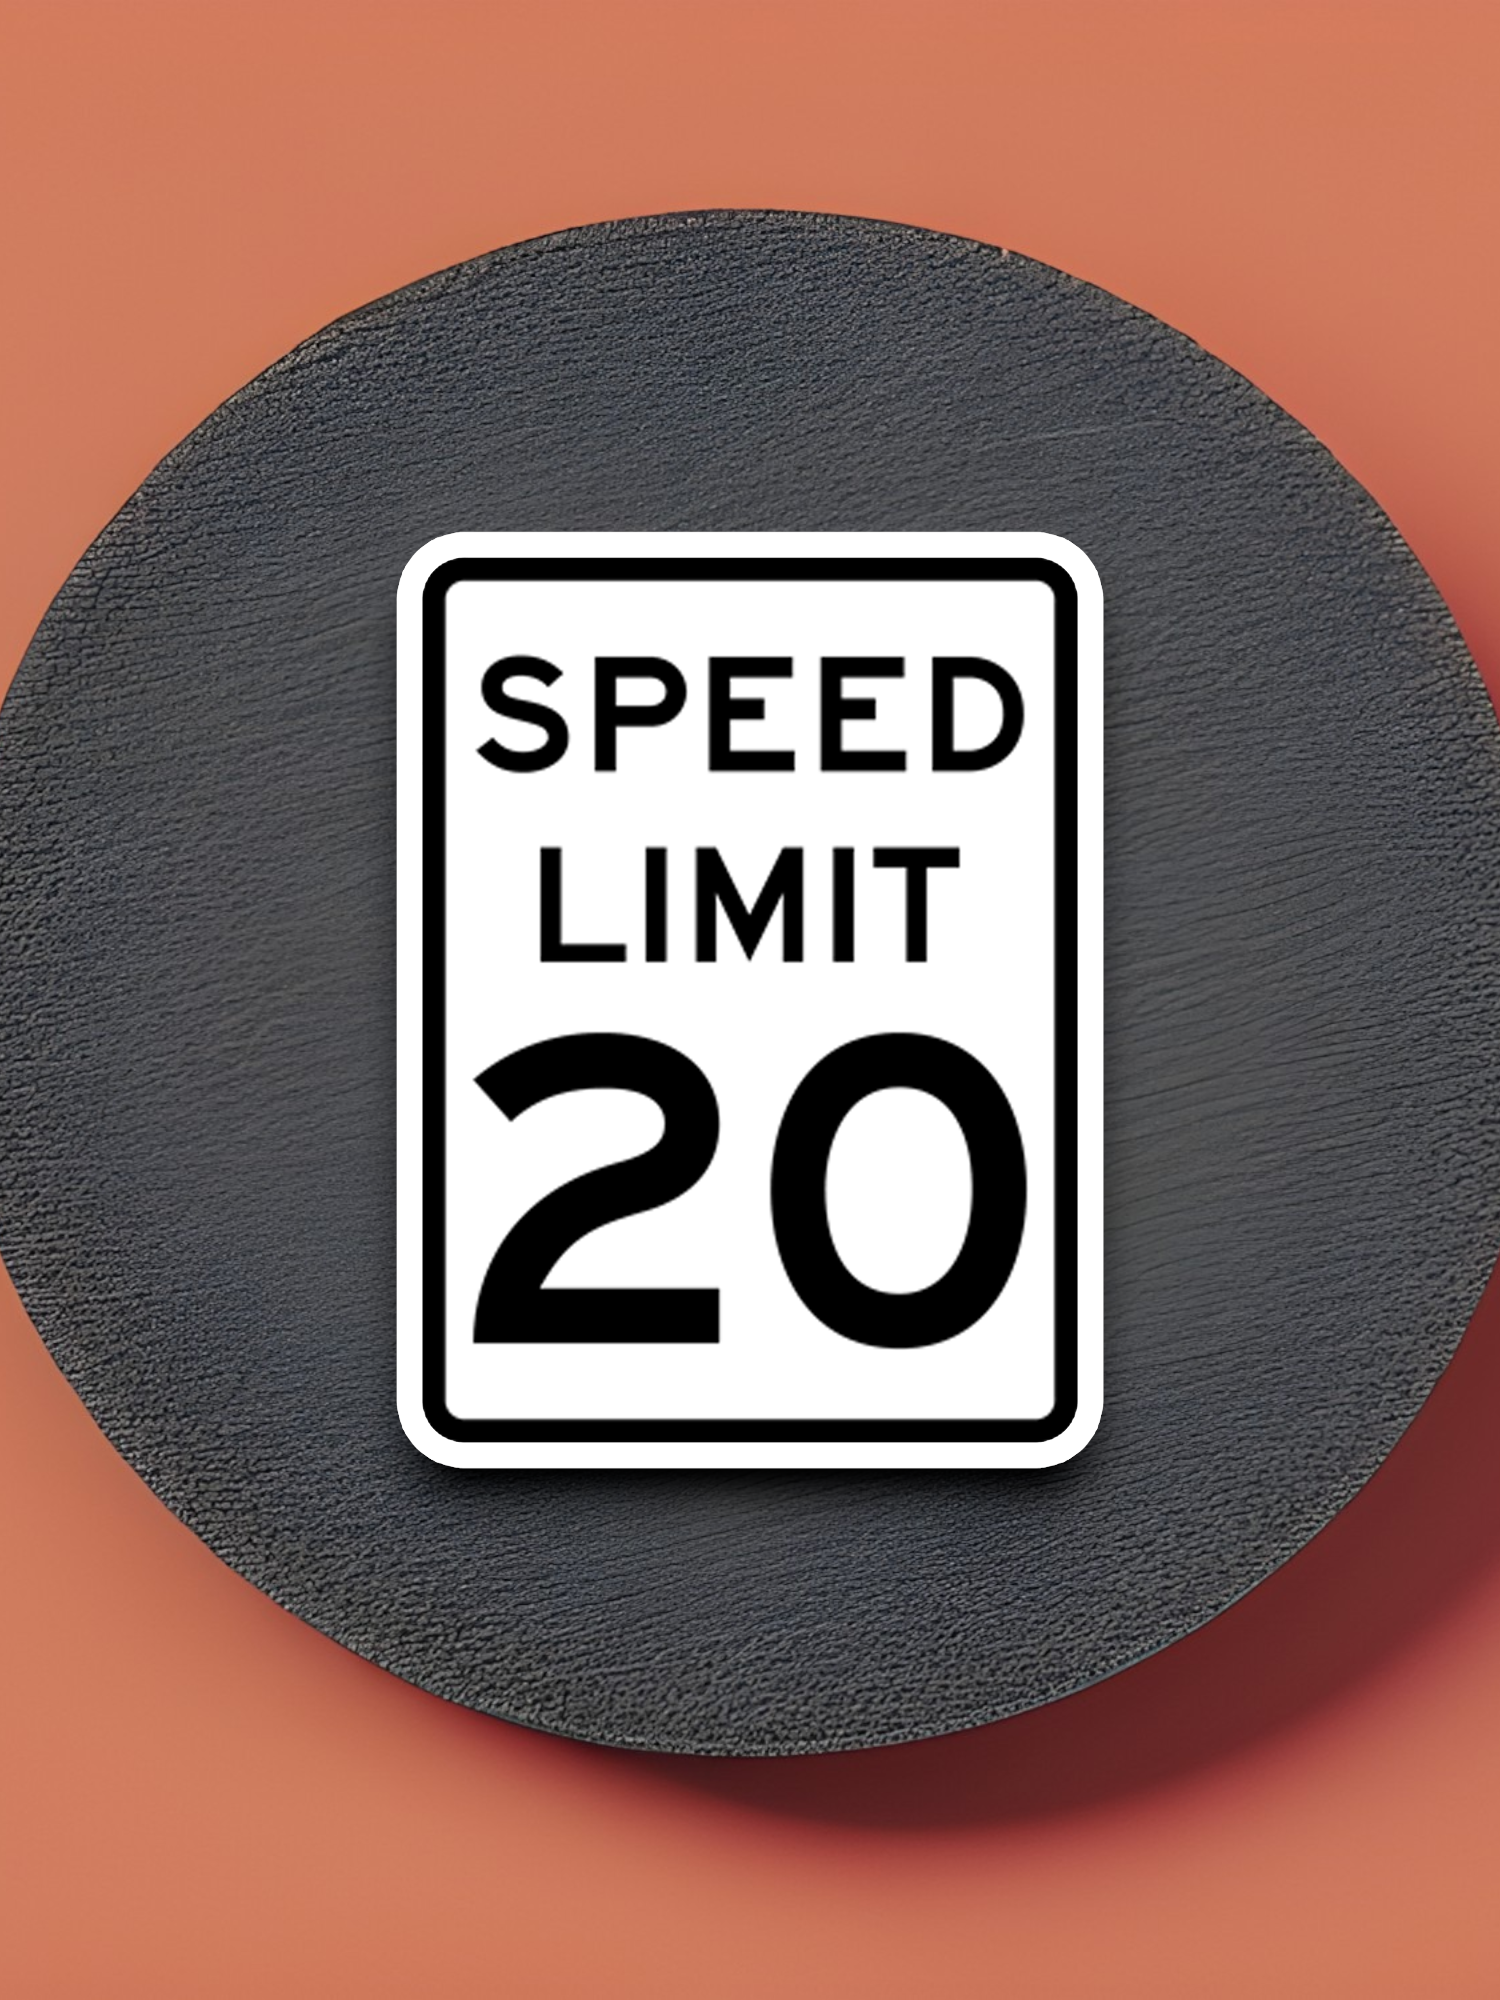 20 Miles Per Hour Speed Limit Road Sign Sticker